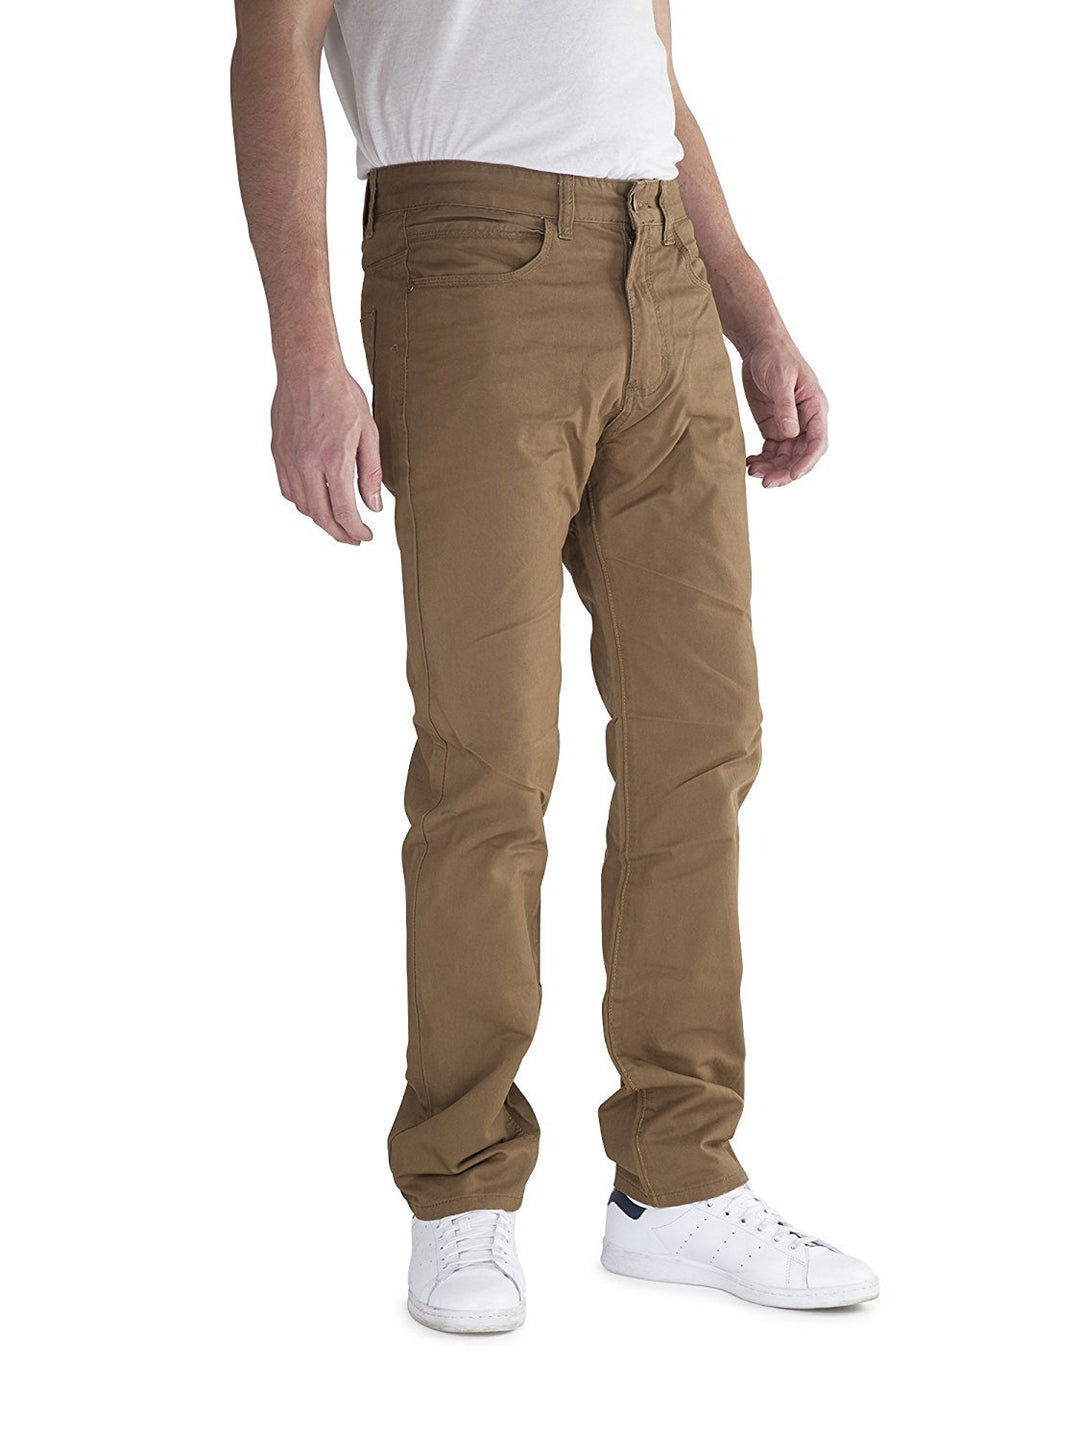 400 UOMO Men's Easy Khaki Slim-Straight Flat Front Casual Twill Pant- Available in Many Colors - CLEARANCE - FINAL SALE